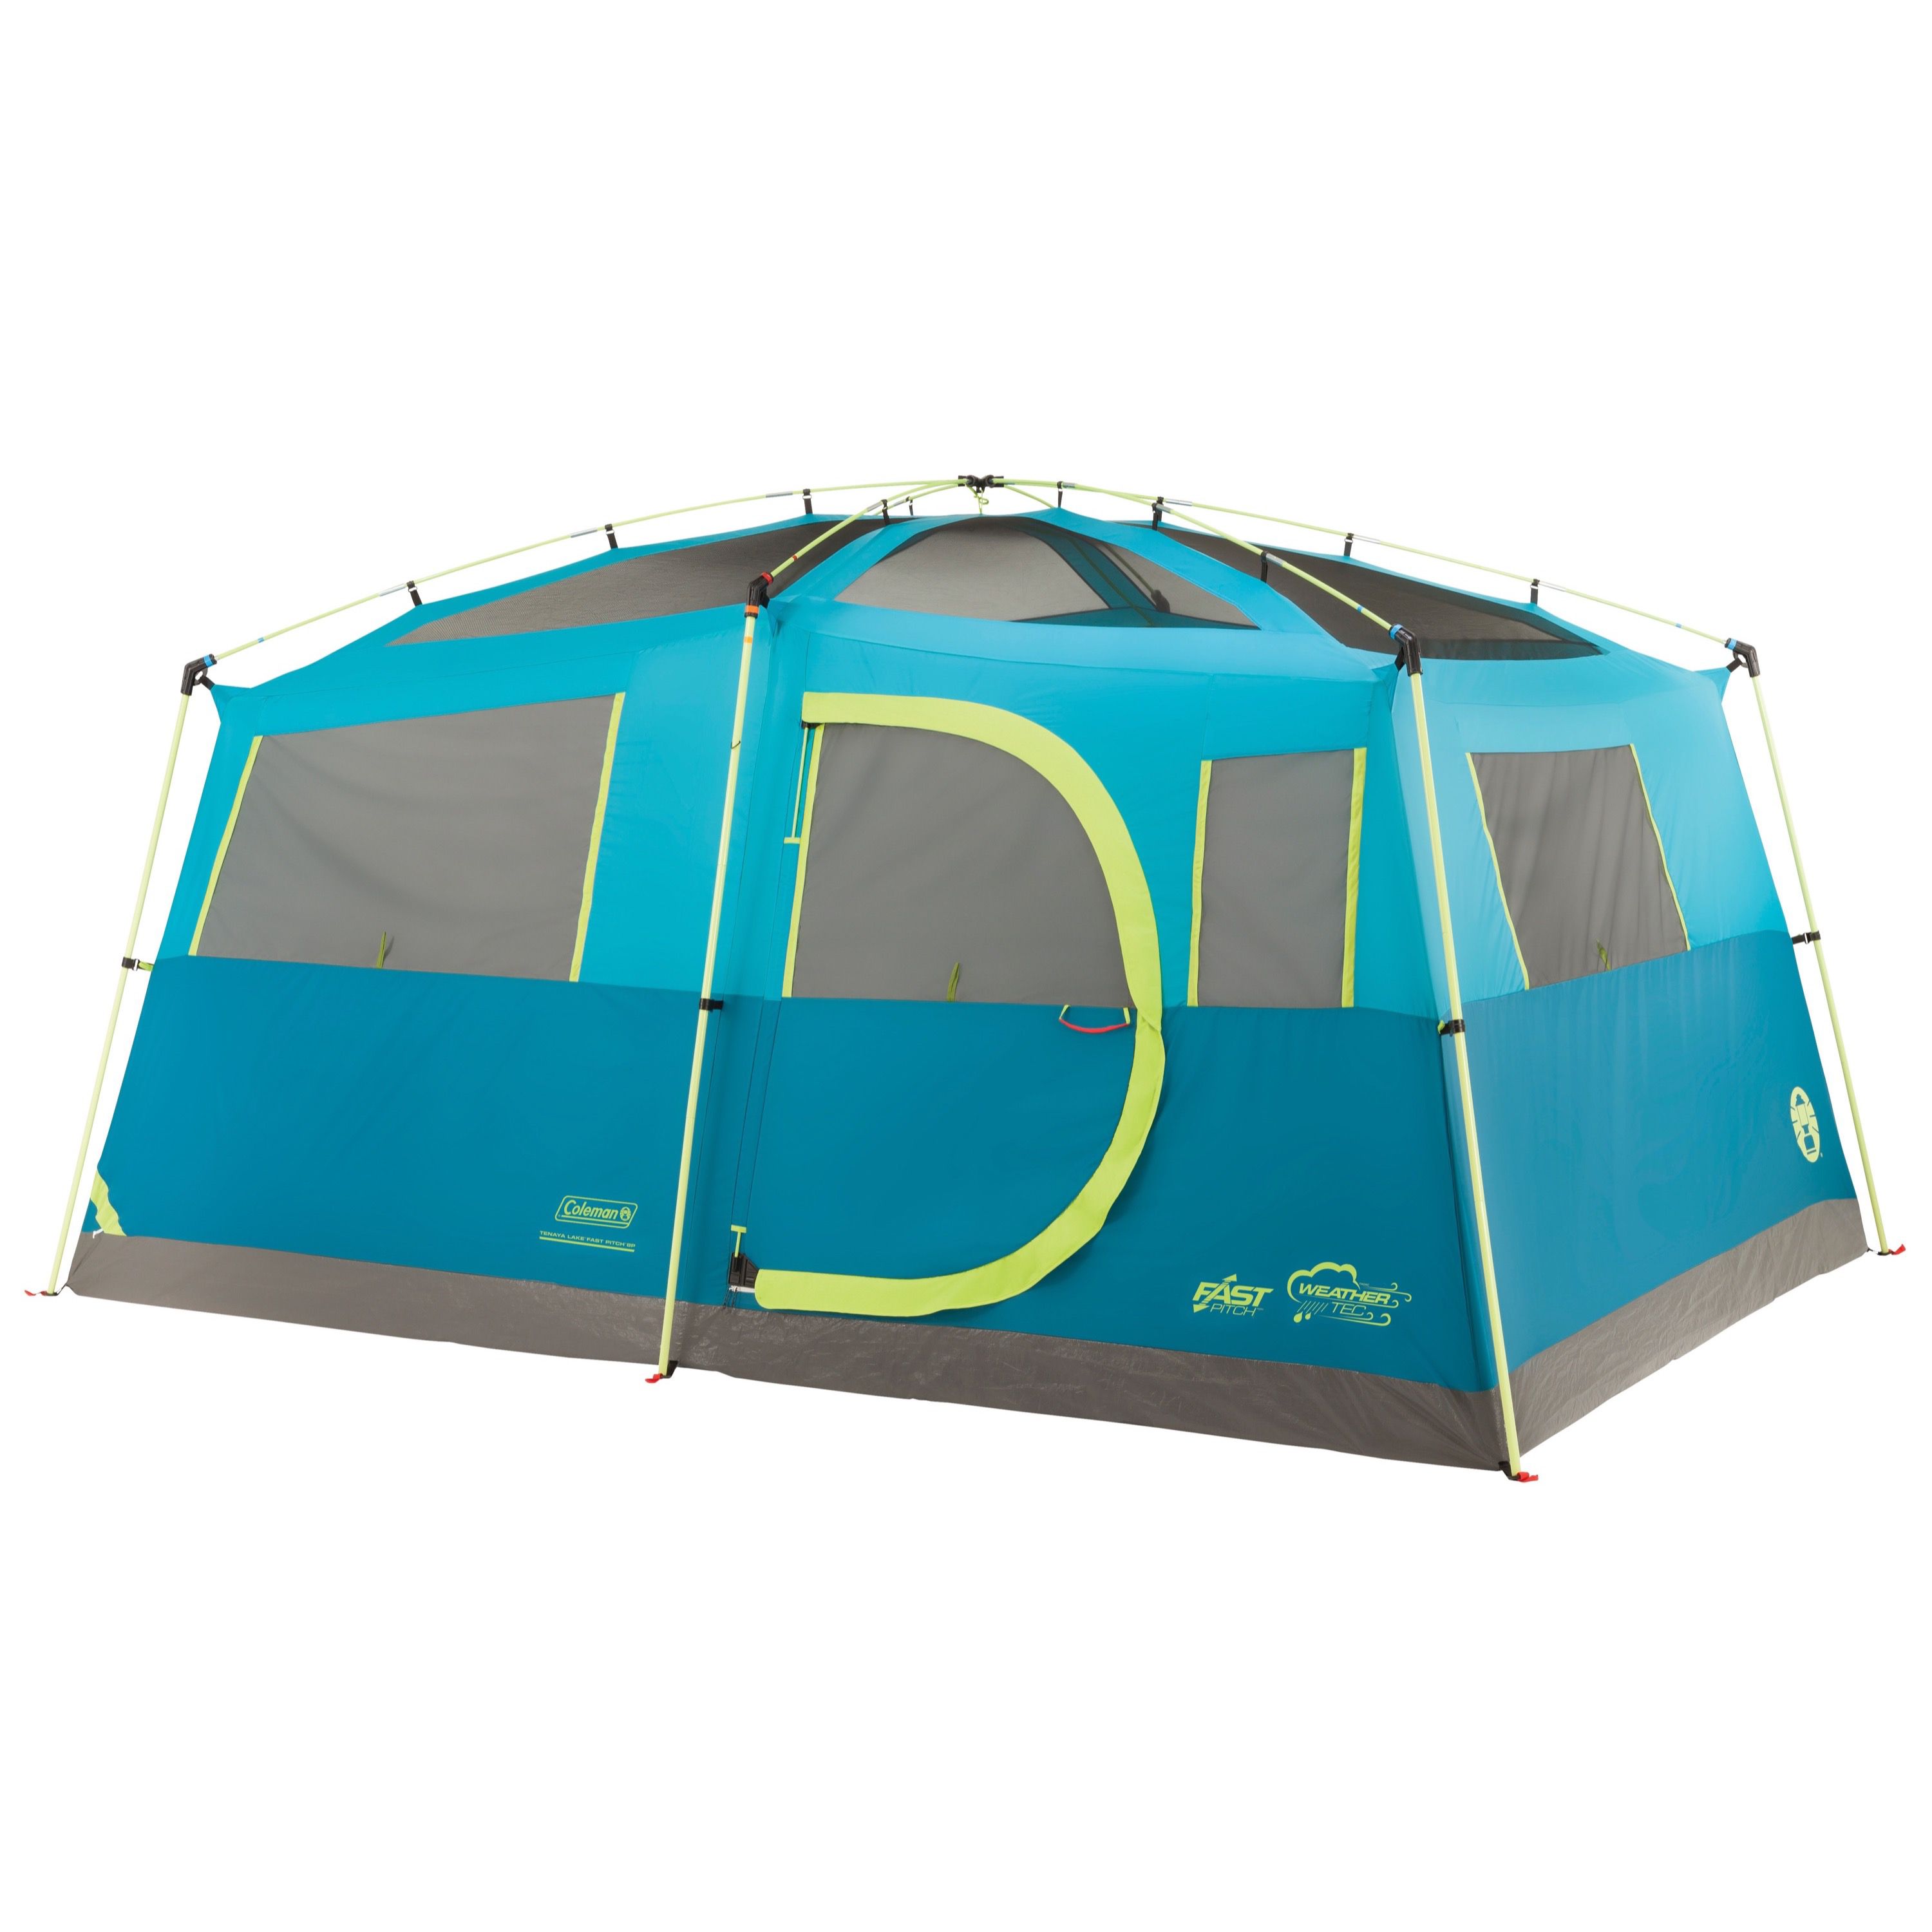 Coleman® 8-Person Tenaya Lake™ Fast Pitch™ Cabin Camping Tent with Closet, Light Blue - image 3 of 11